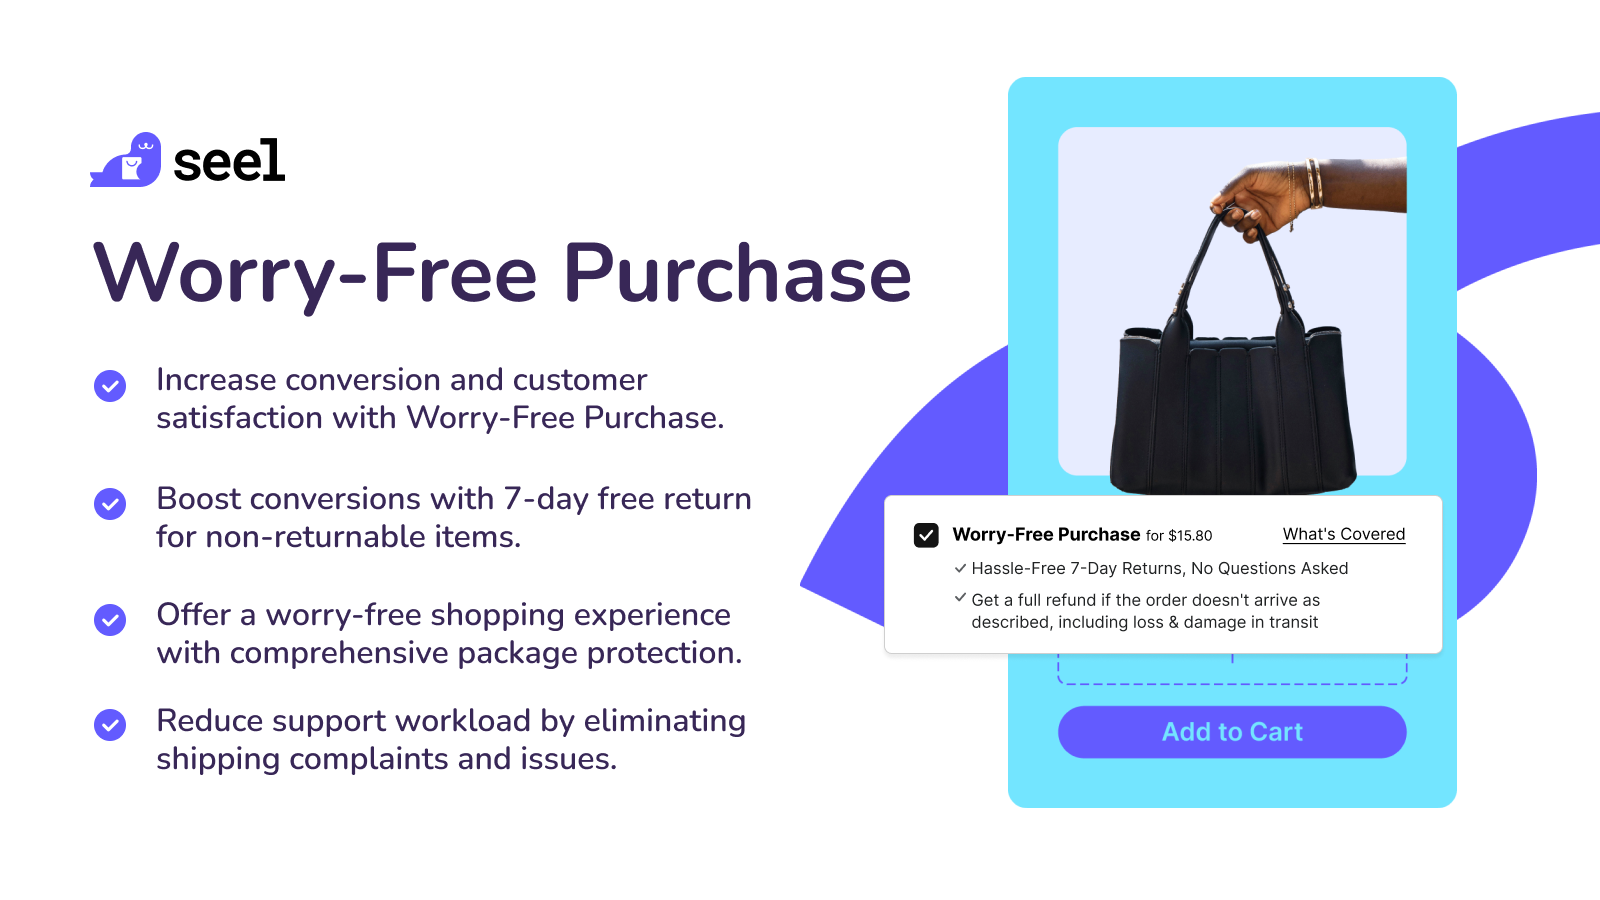 Seel worry-free purchase